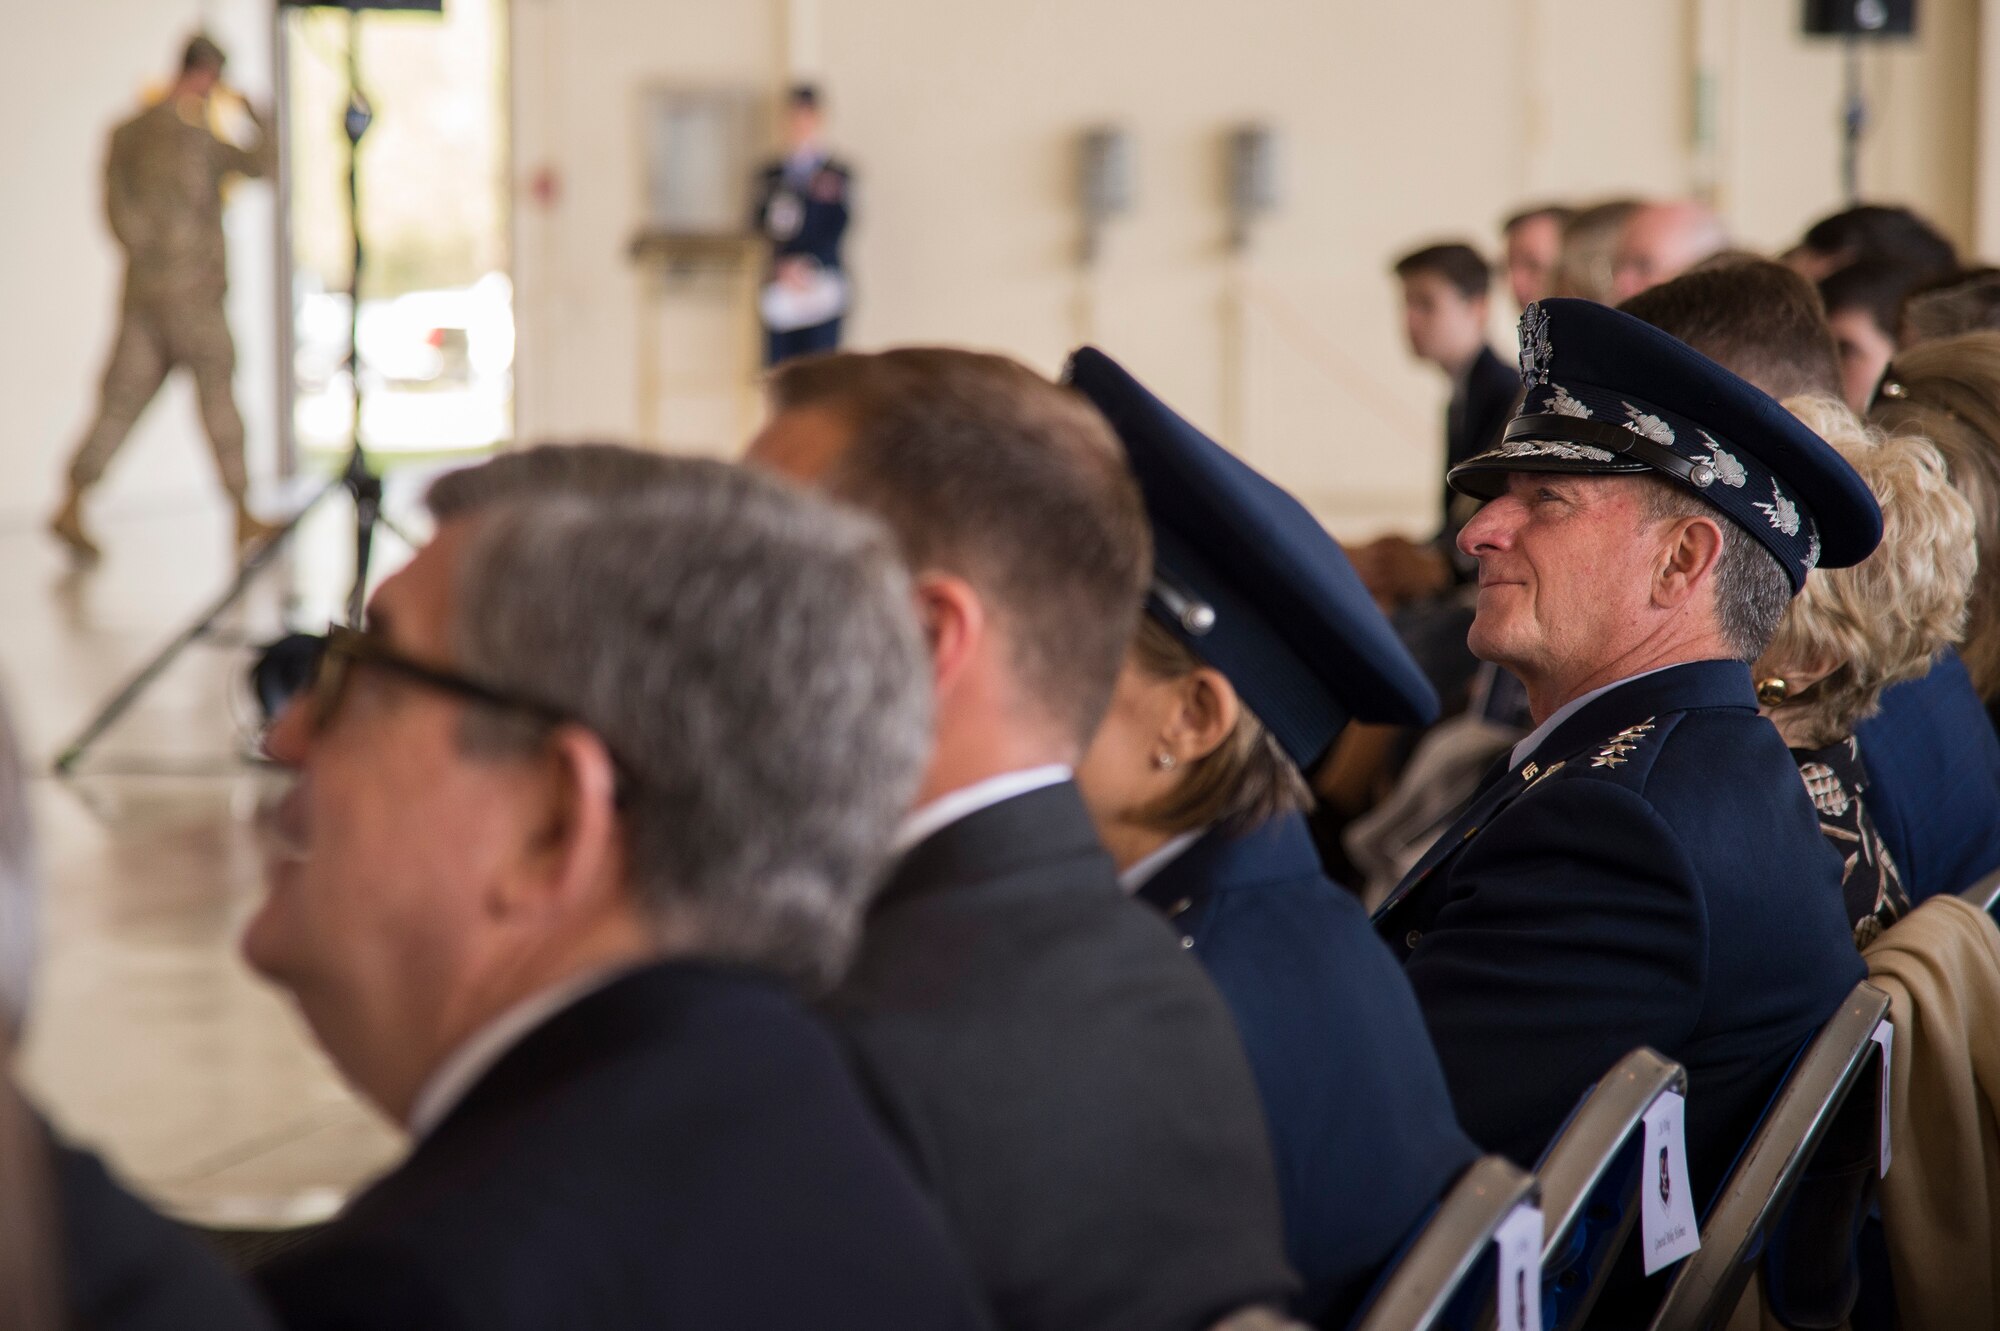 Air Force Chief of Staff Gen. David L. Goldfein listens to remarks during the Celebration of Life ceremony honoring Mr. W. Parker Greene, March 14, 2019, at Moody Air Force Base, Ga. Greene, a steadfast Air Force advocate and one of the most influential military civic leaders passed away Dec. 18, 2018. (U.S. Air Force Photo by Andrea Jenkins)